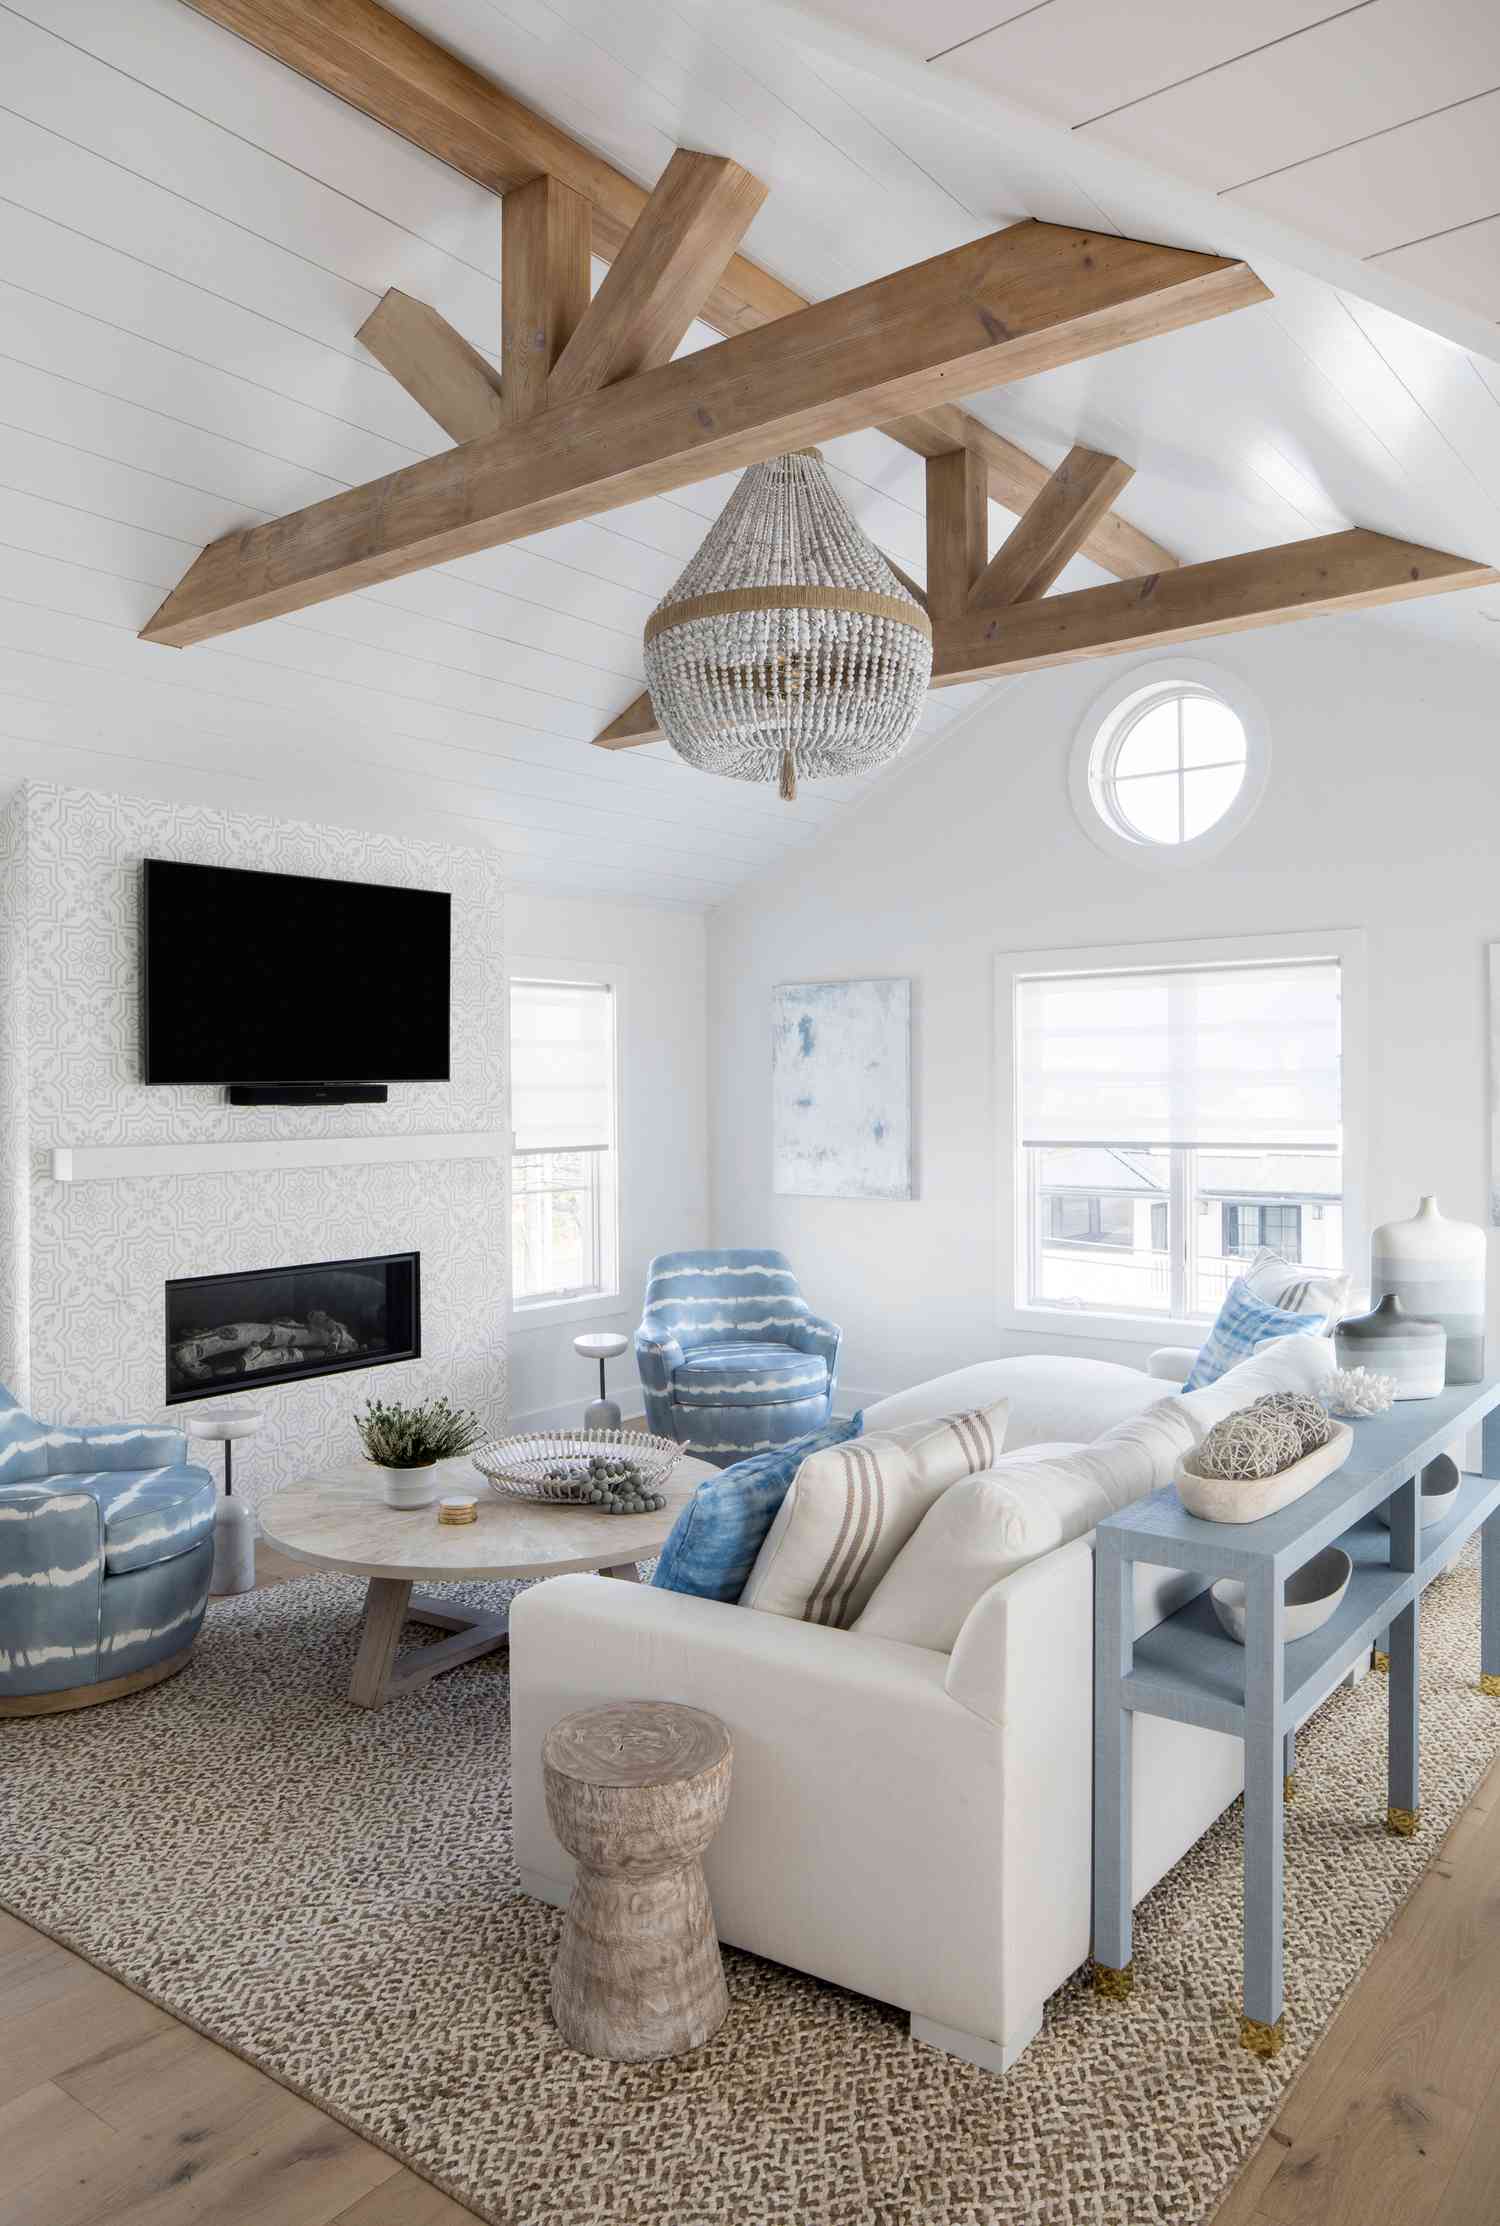 Karen B. Wolfe's Long Beach Island home with raised ceilings in living area